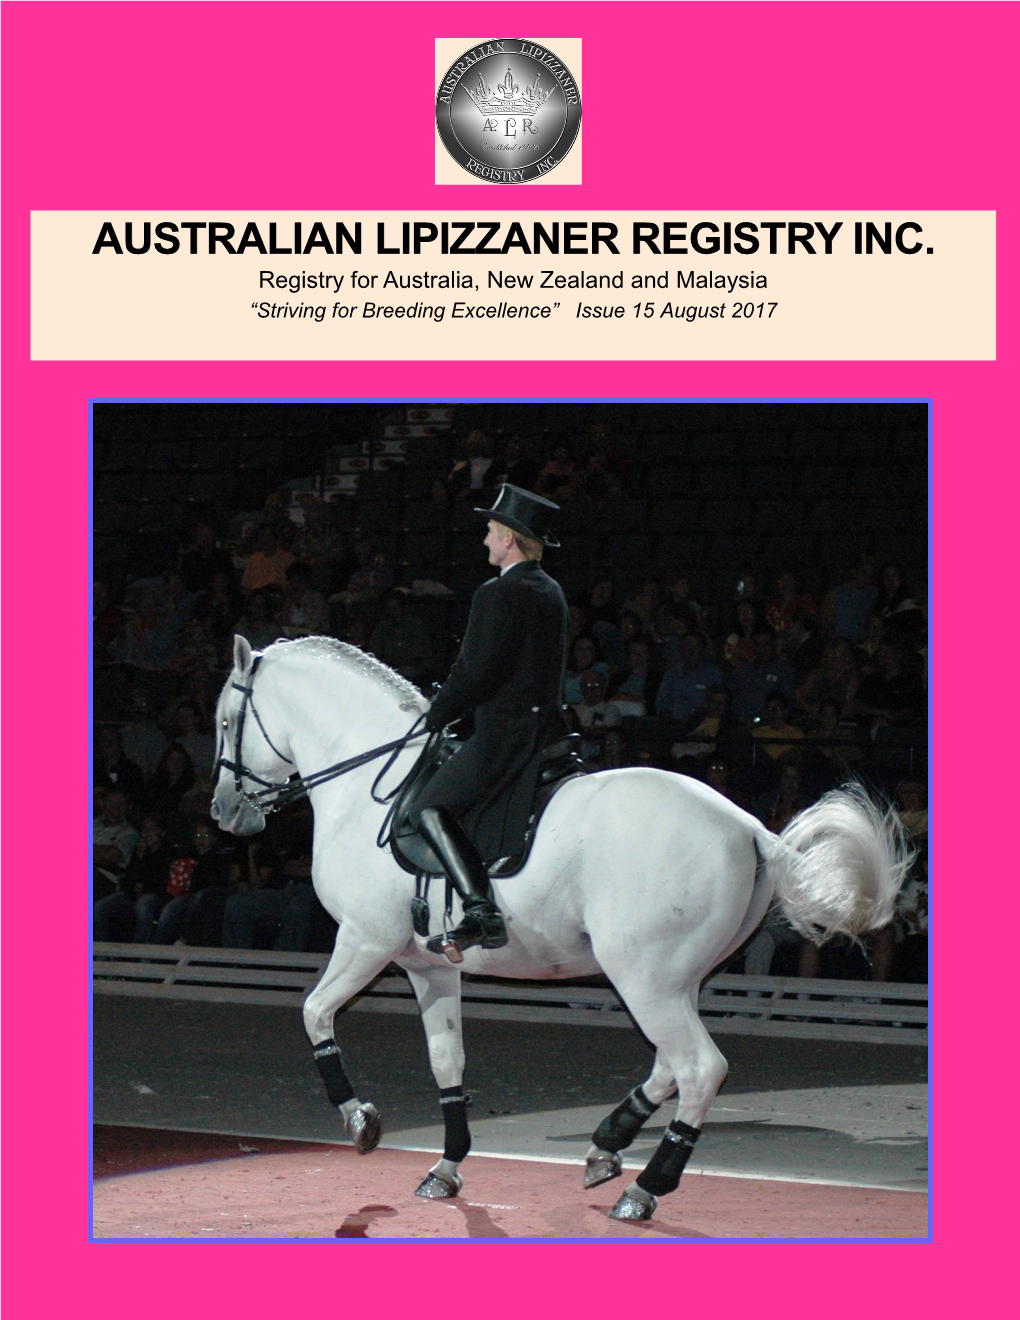 AUSTRALIAN LIPIZZANER REGISTRY INC. Registry for Australia, New Zealand and Malaysia “Striving for Breeding Excellence” Issue 15 August 2017